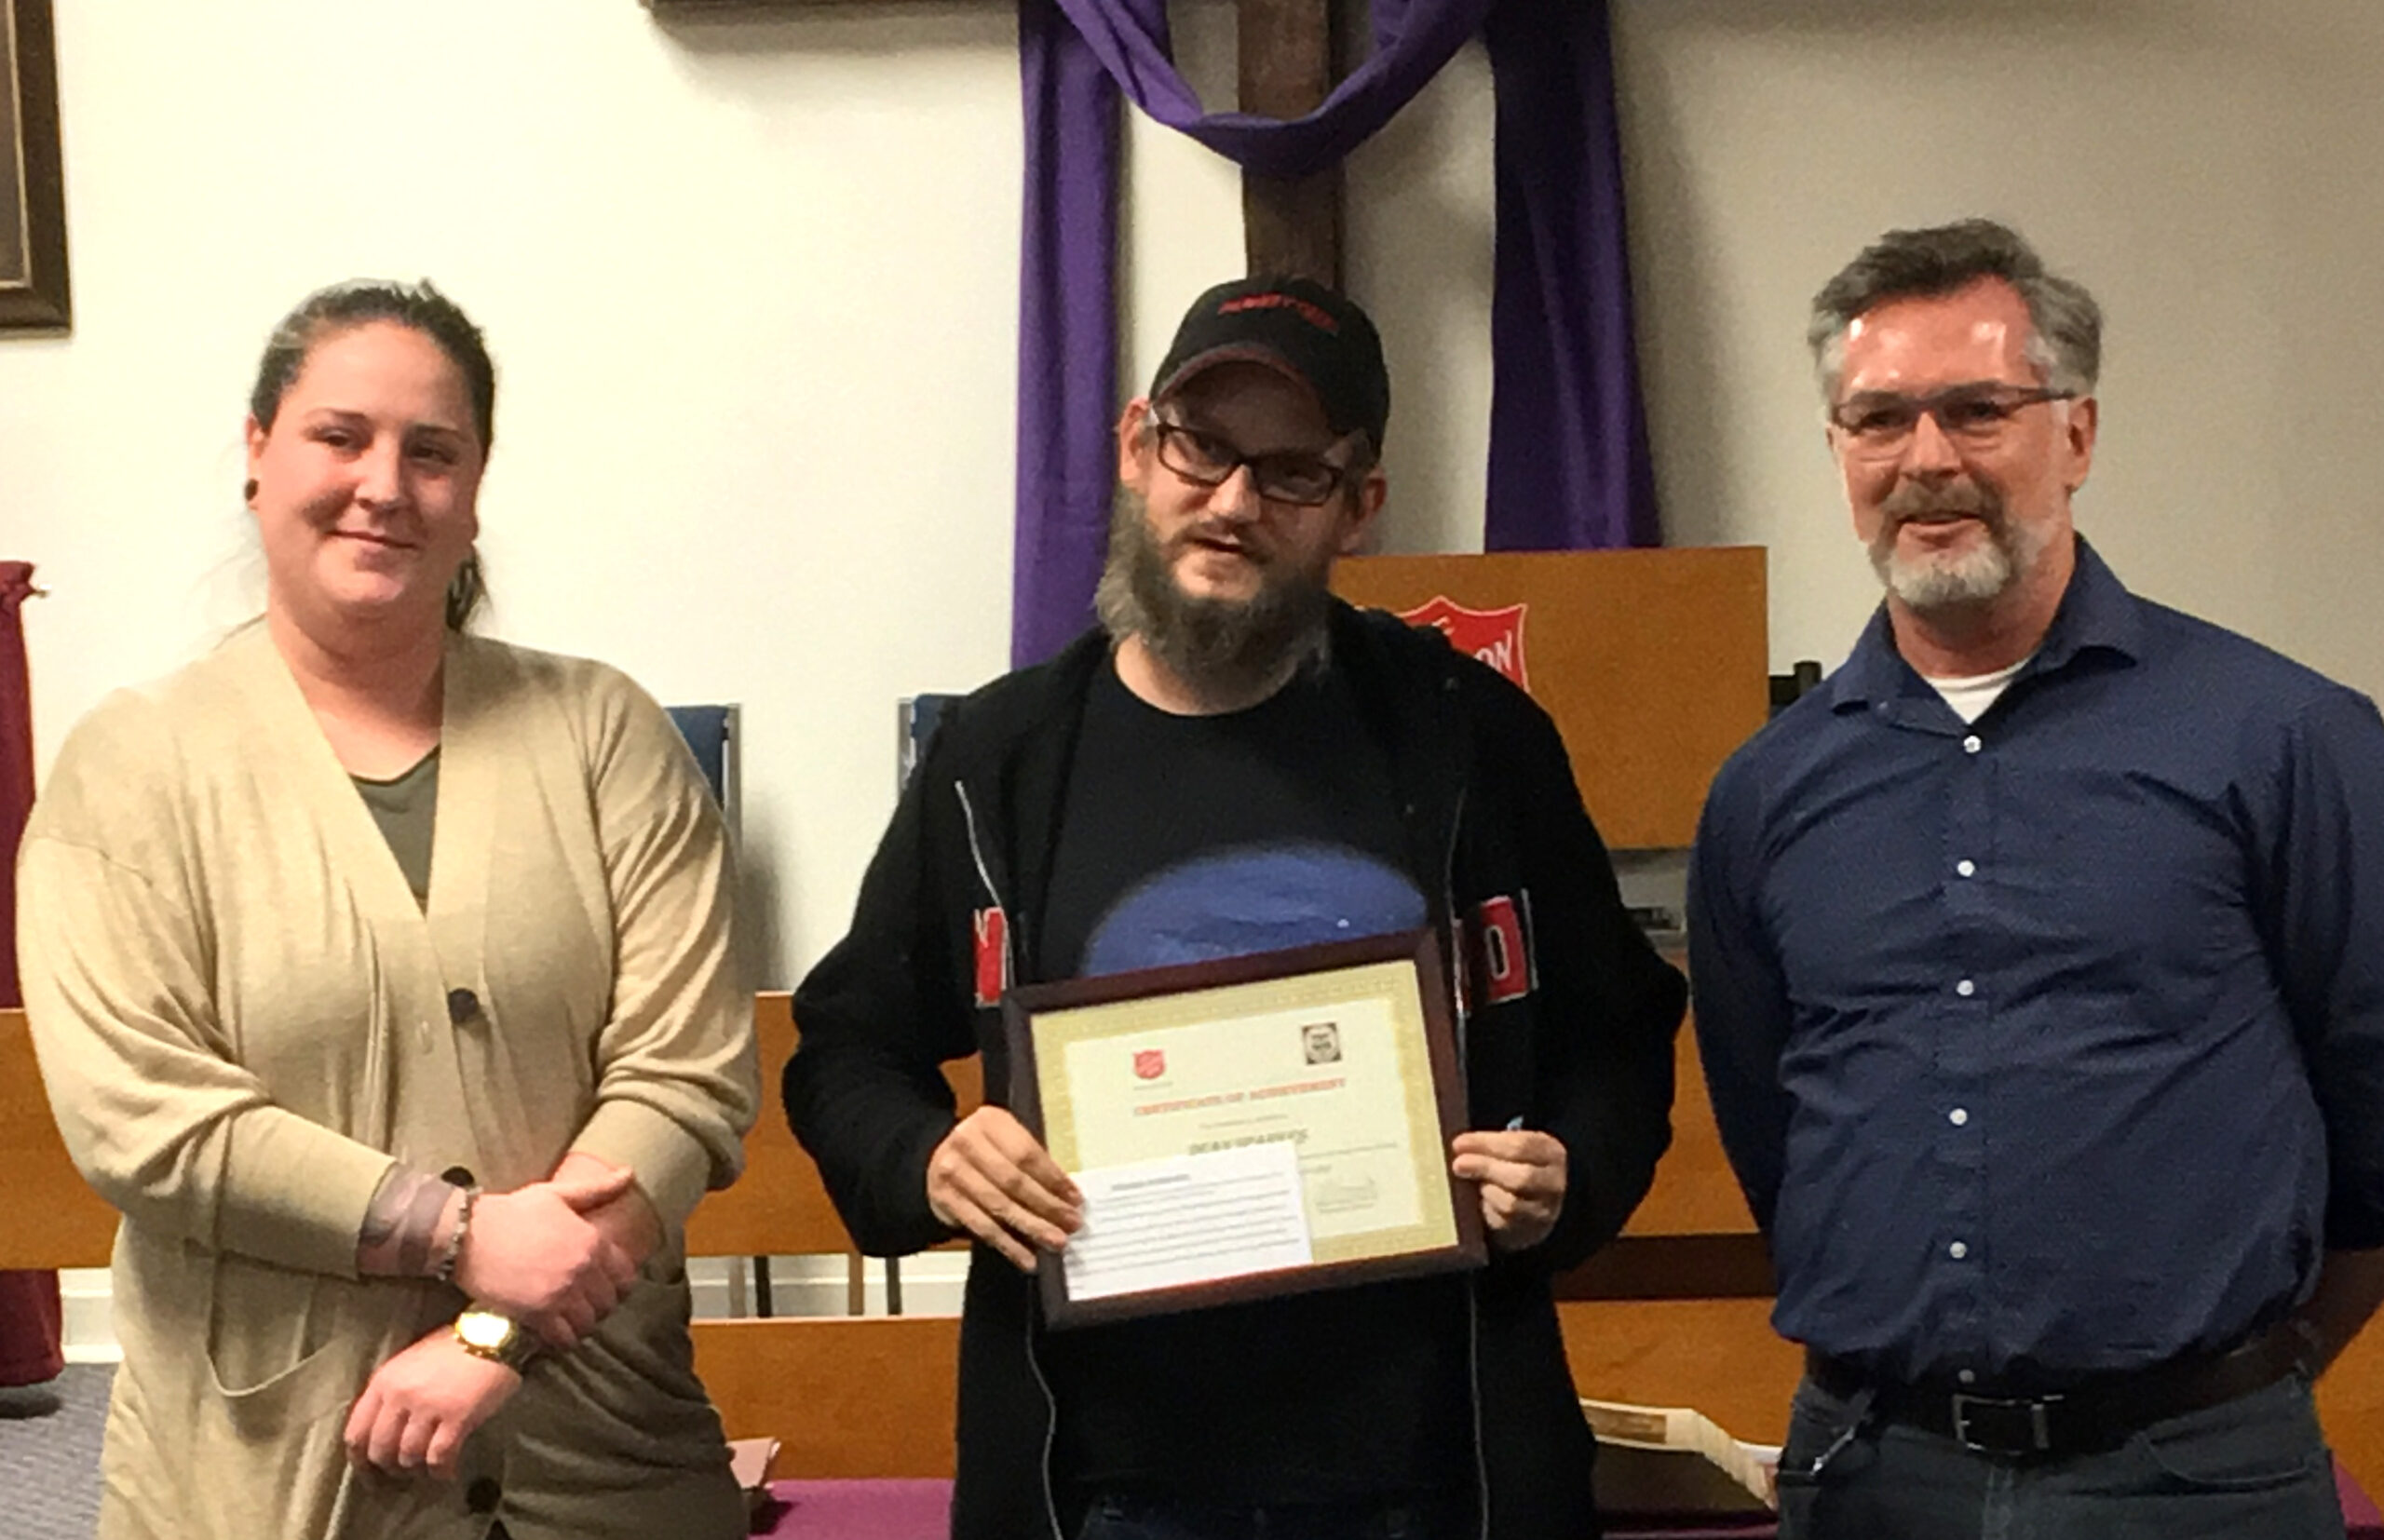 From left to right, a woman and two men stand at the front of the chapel and the man in the centre receives a certificate of completion for The Salvation Army Anchorage Recovery Program.